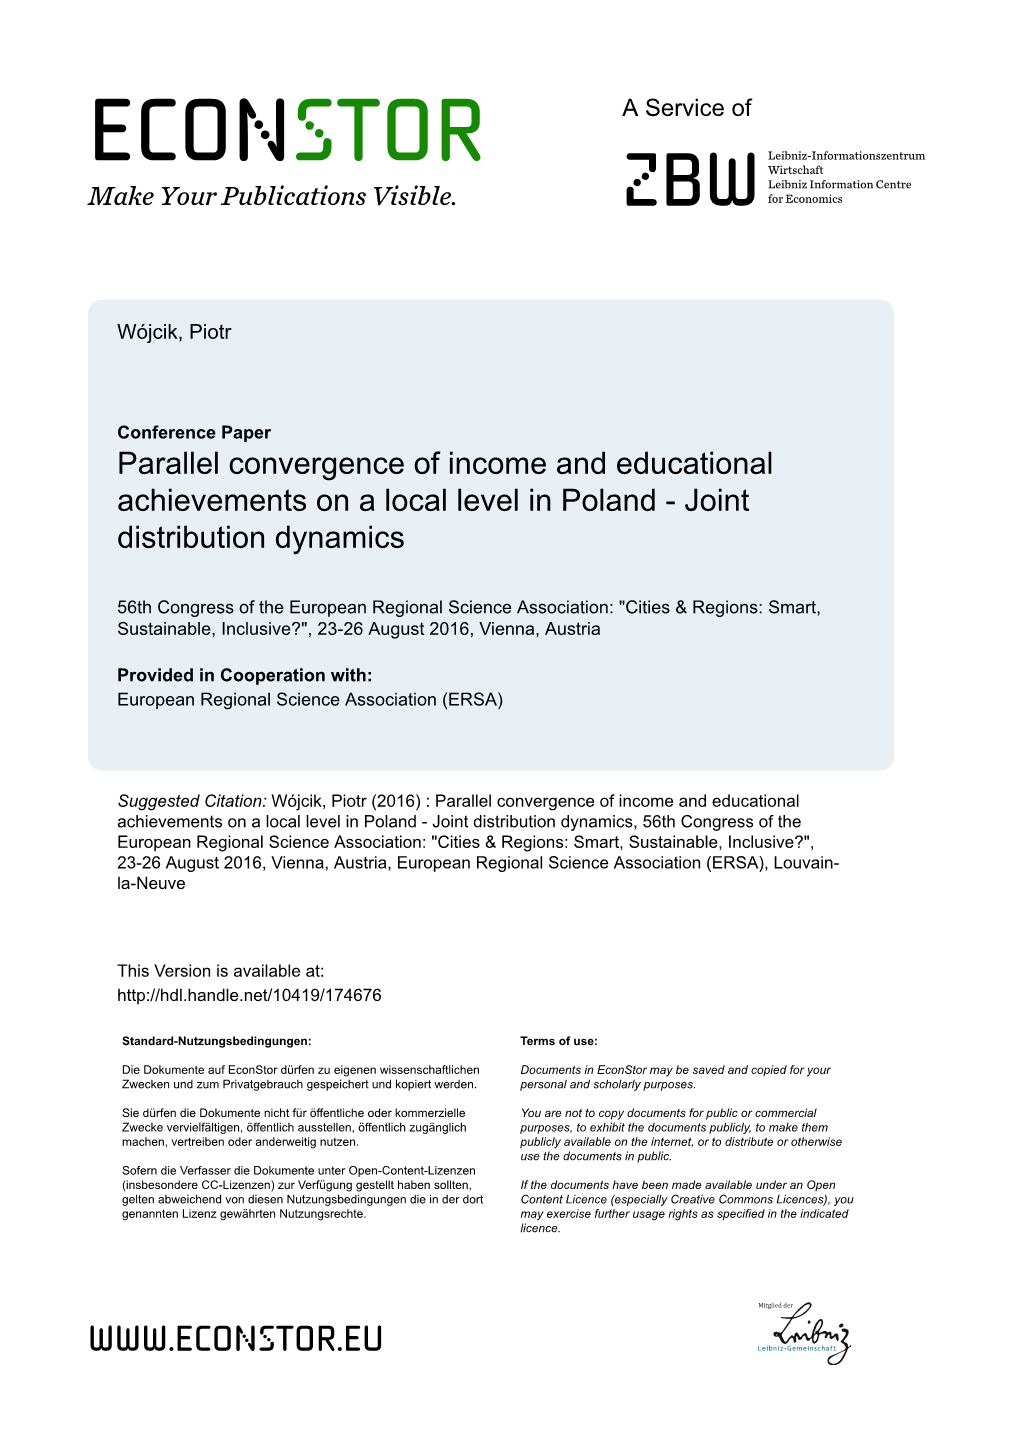 Parallel Convergence of Income and Educational Achievements on a Local Level in Poland - Joint Distribution Dynamics